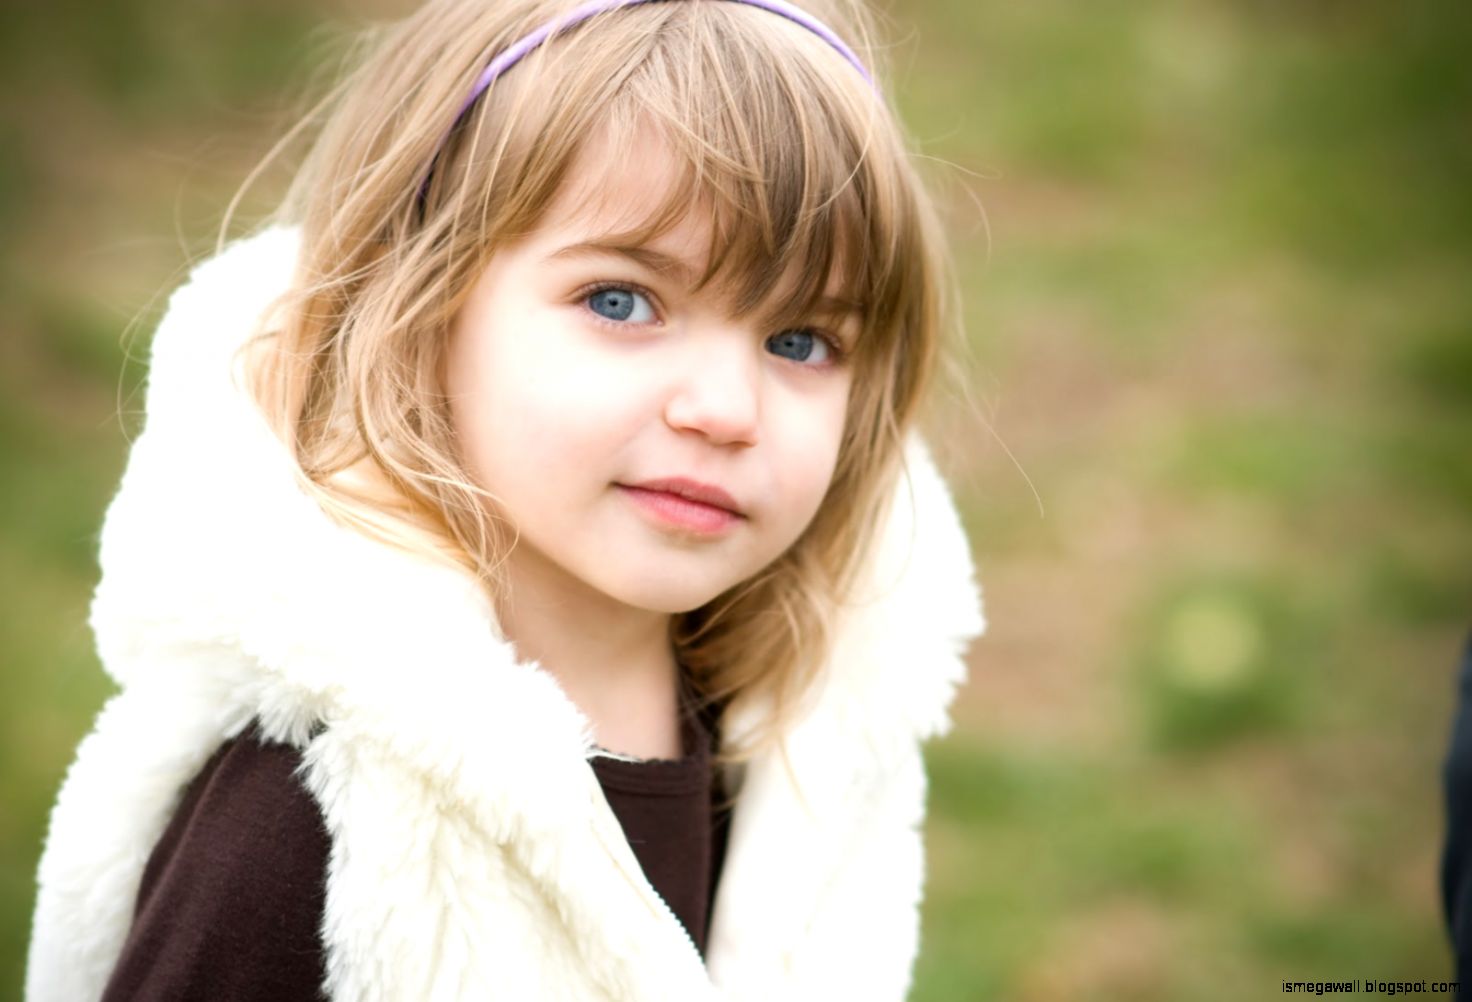 Girl Baby Blue Eyes Hd Wallpapers Important Wallpapers - Photograph - HD Wallpaper 